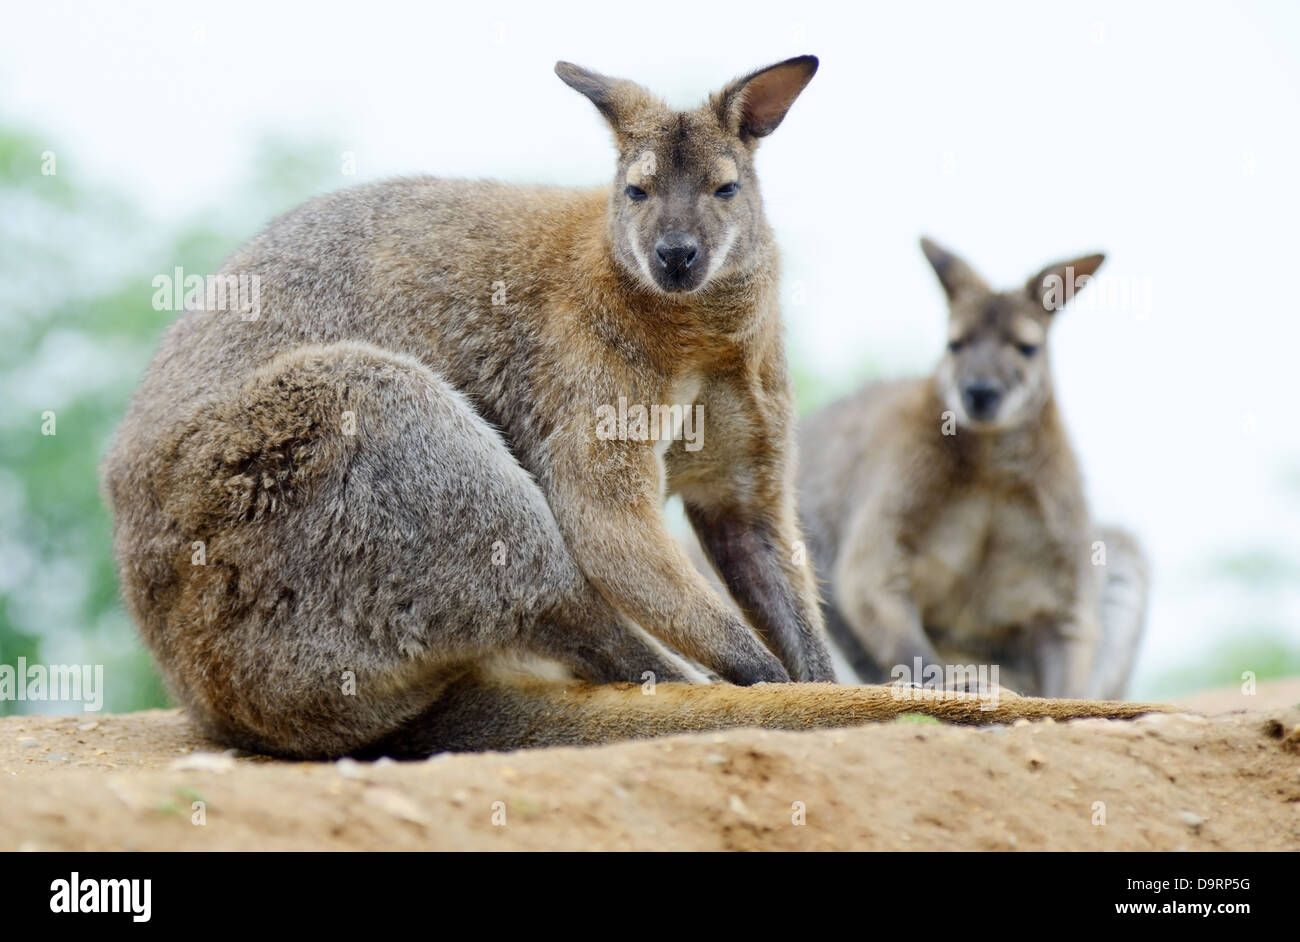 Two wallabies sitting and resting showing fur detail Stock Photo